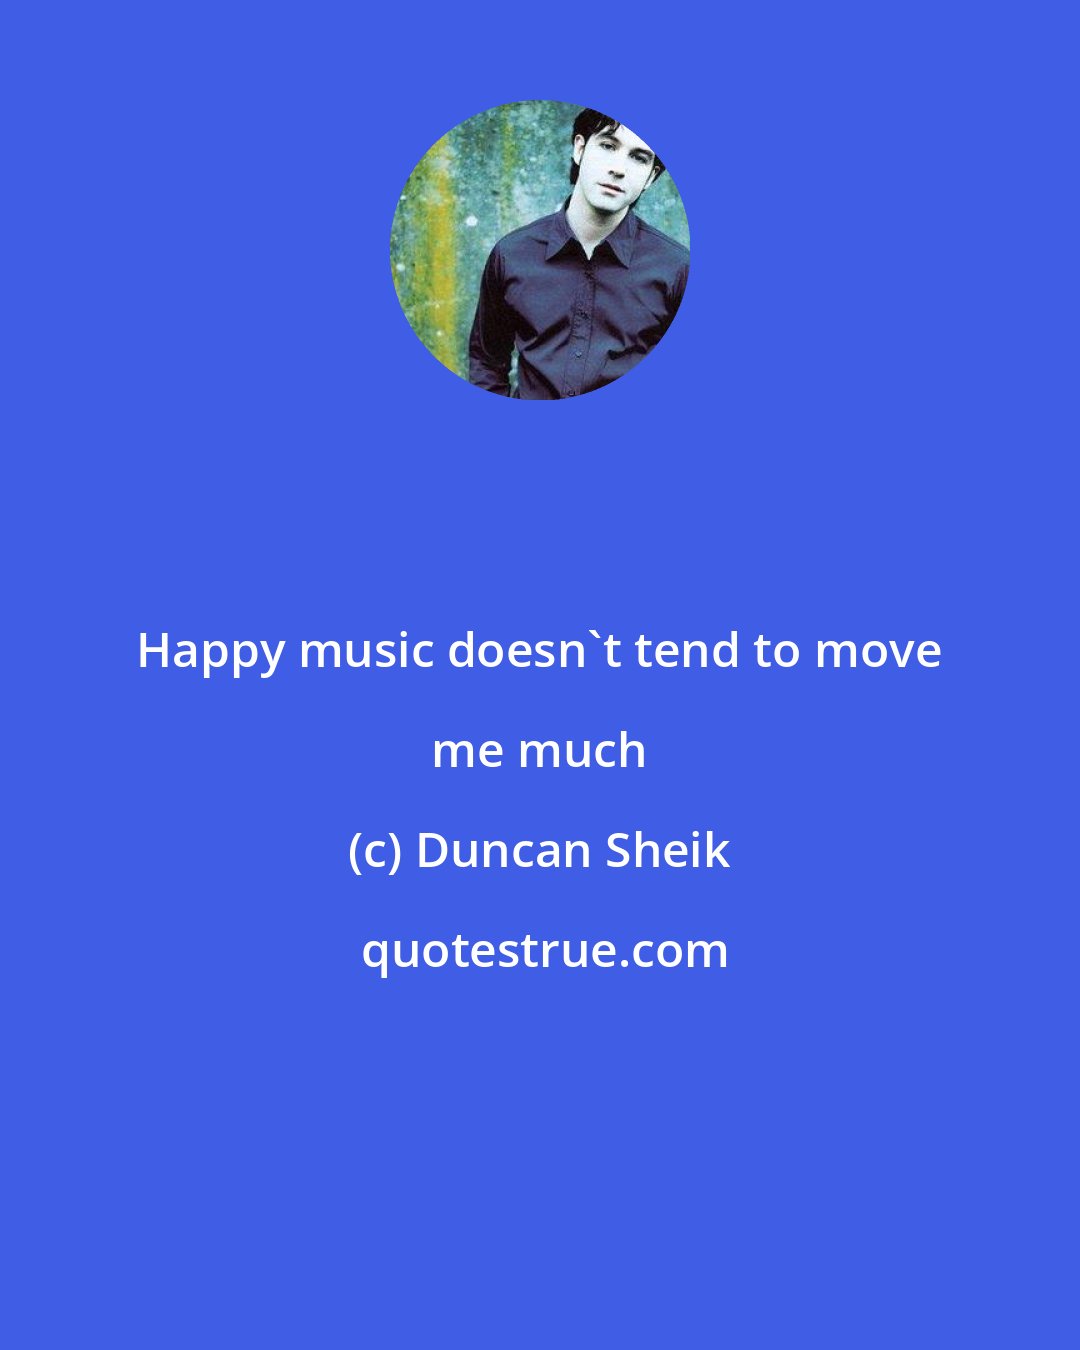 Duncan Sheik: Happy music doesn't tend to move me much